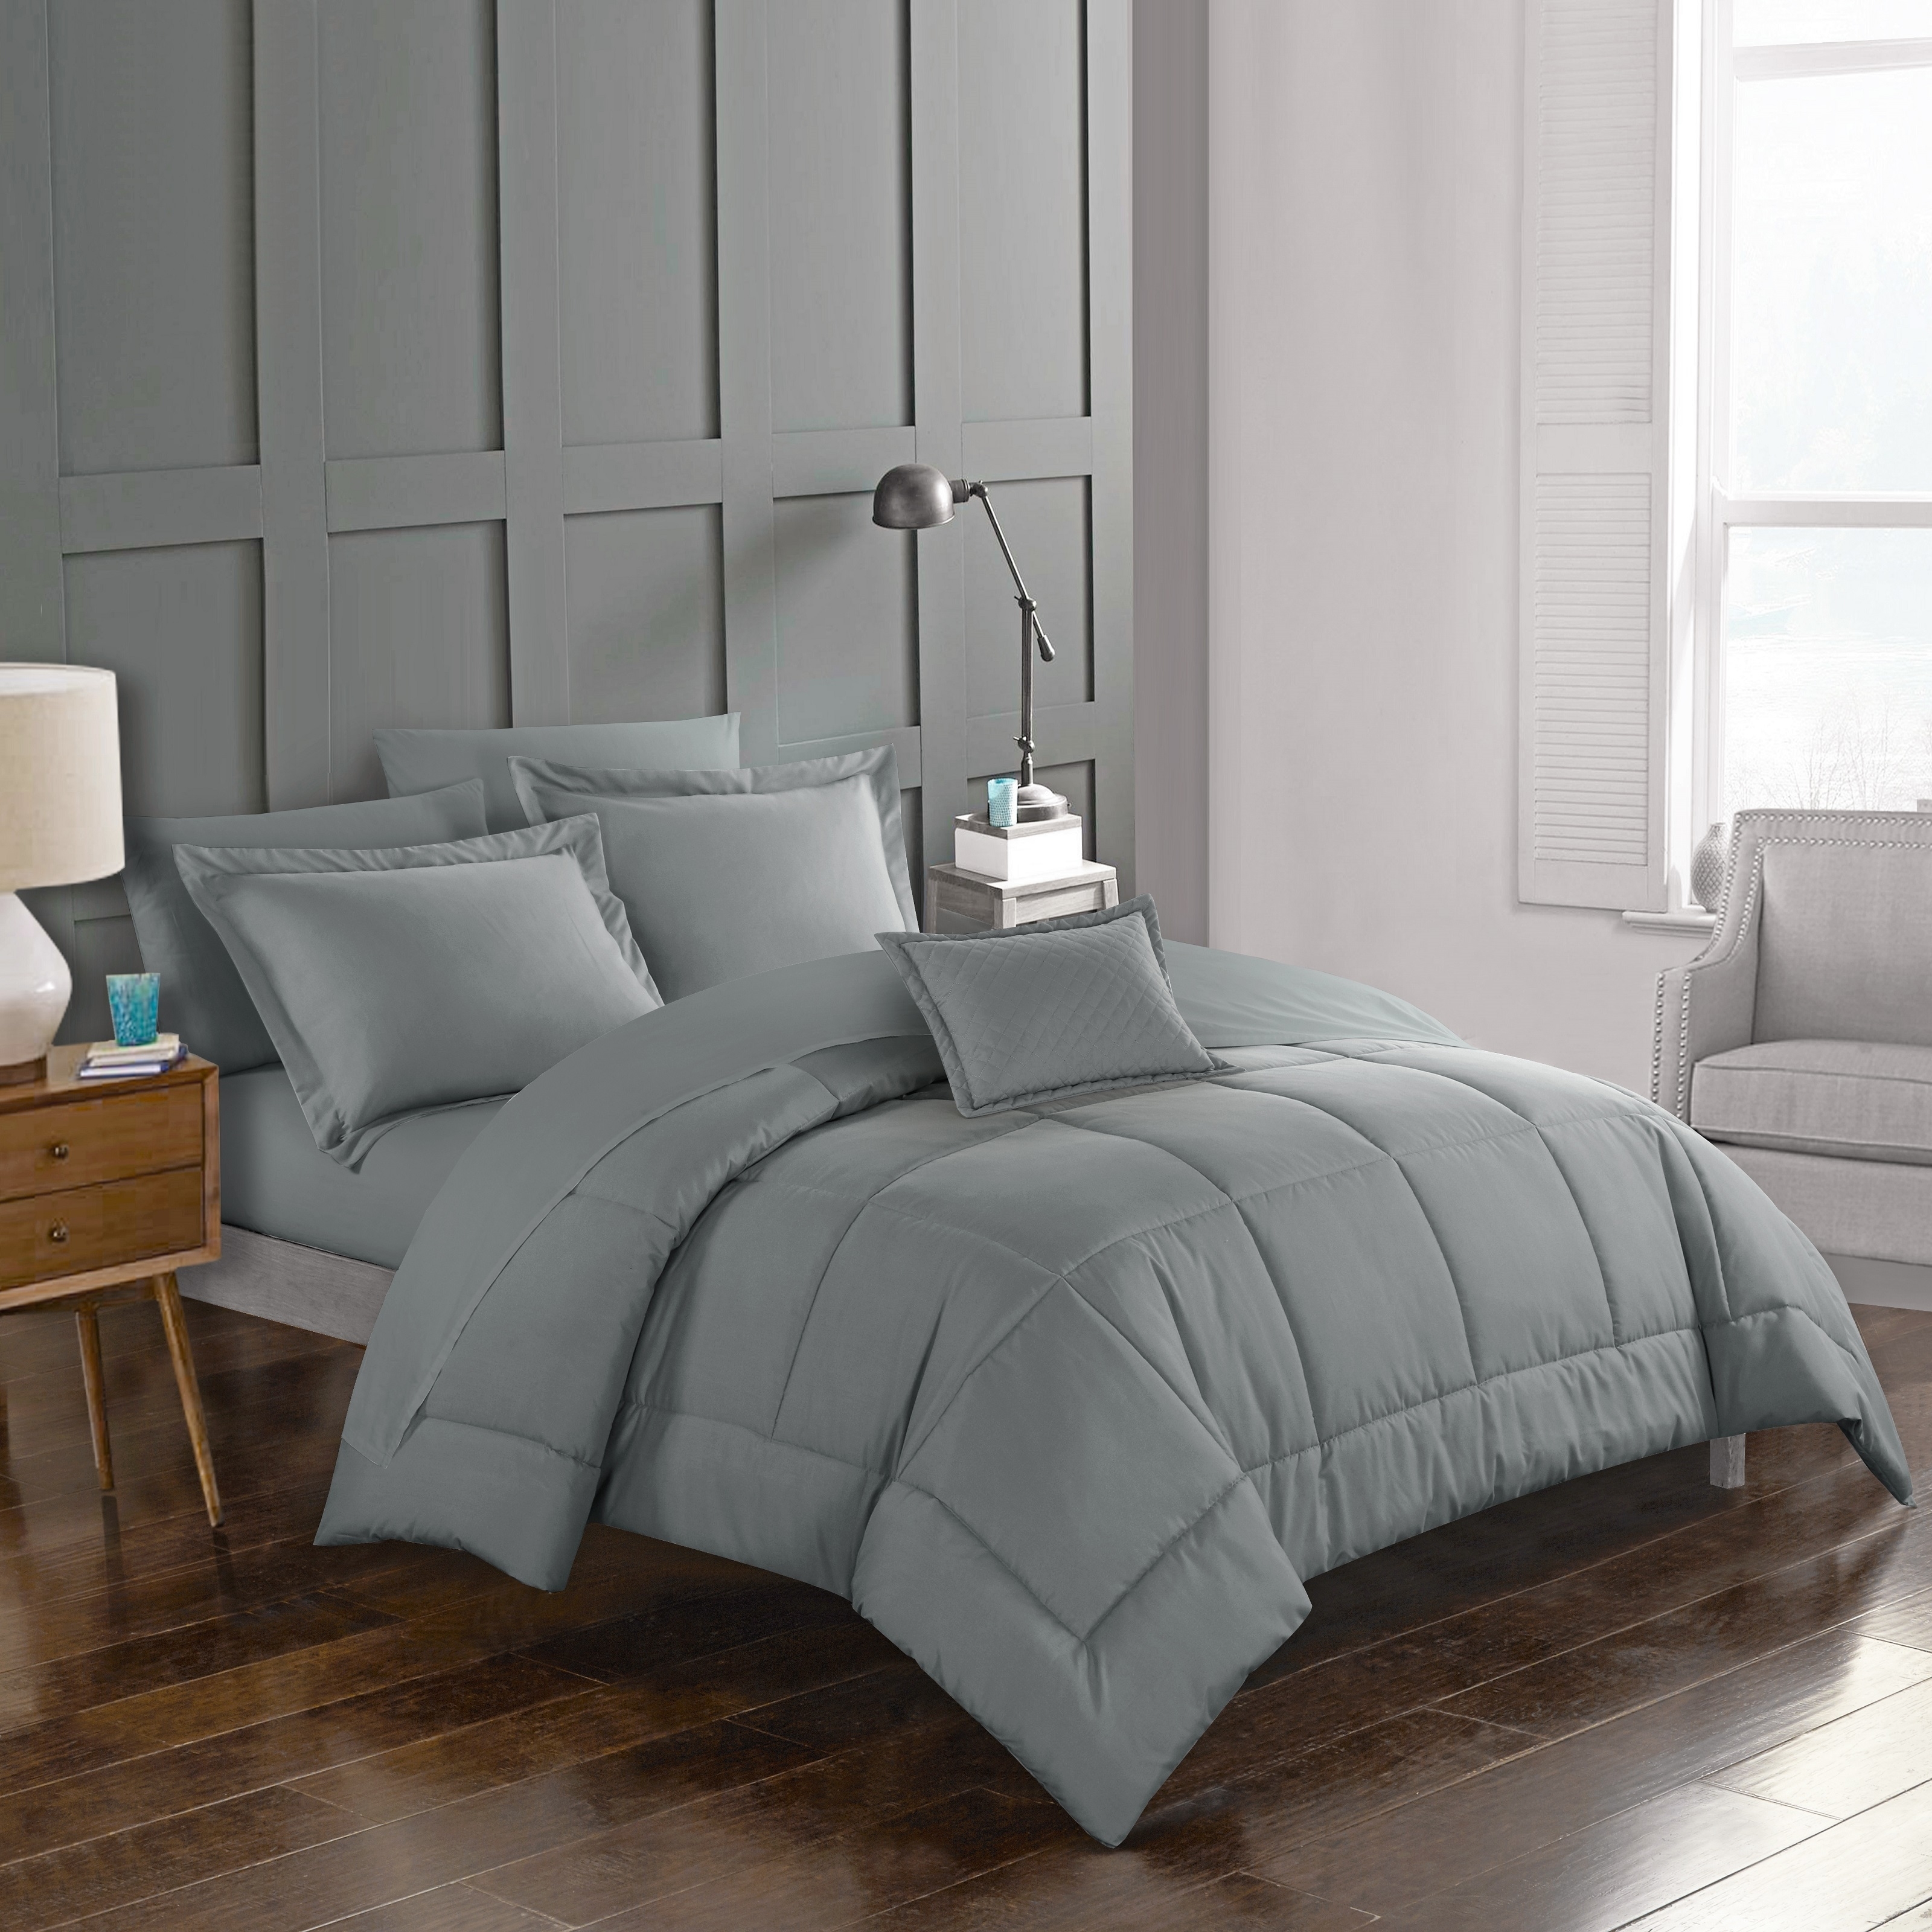 Joshuah 8 Or 6 Piece Comforter Set Pieced Solid Color Stitched With Sheet Set - Grey, Twin